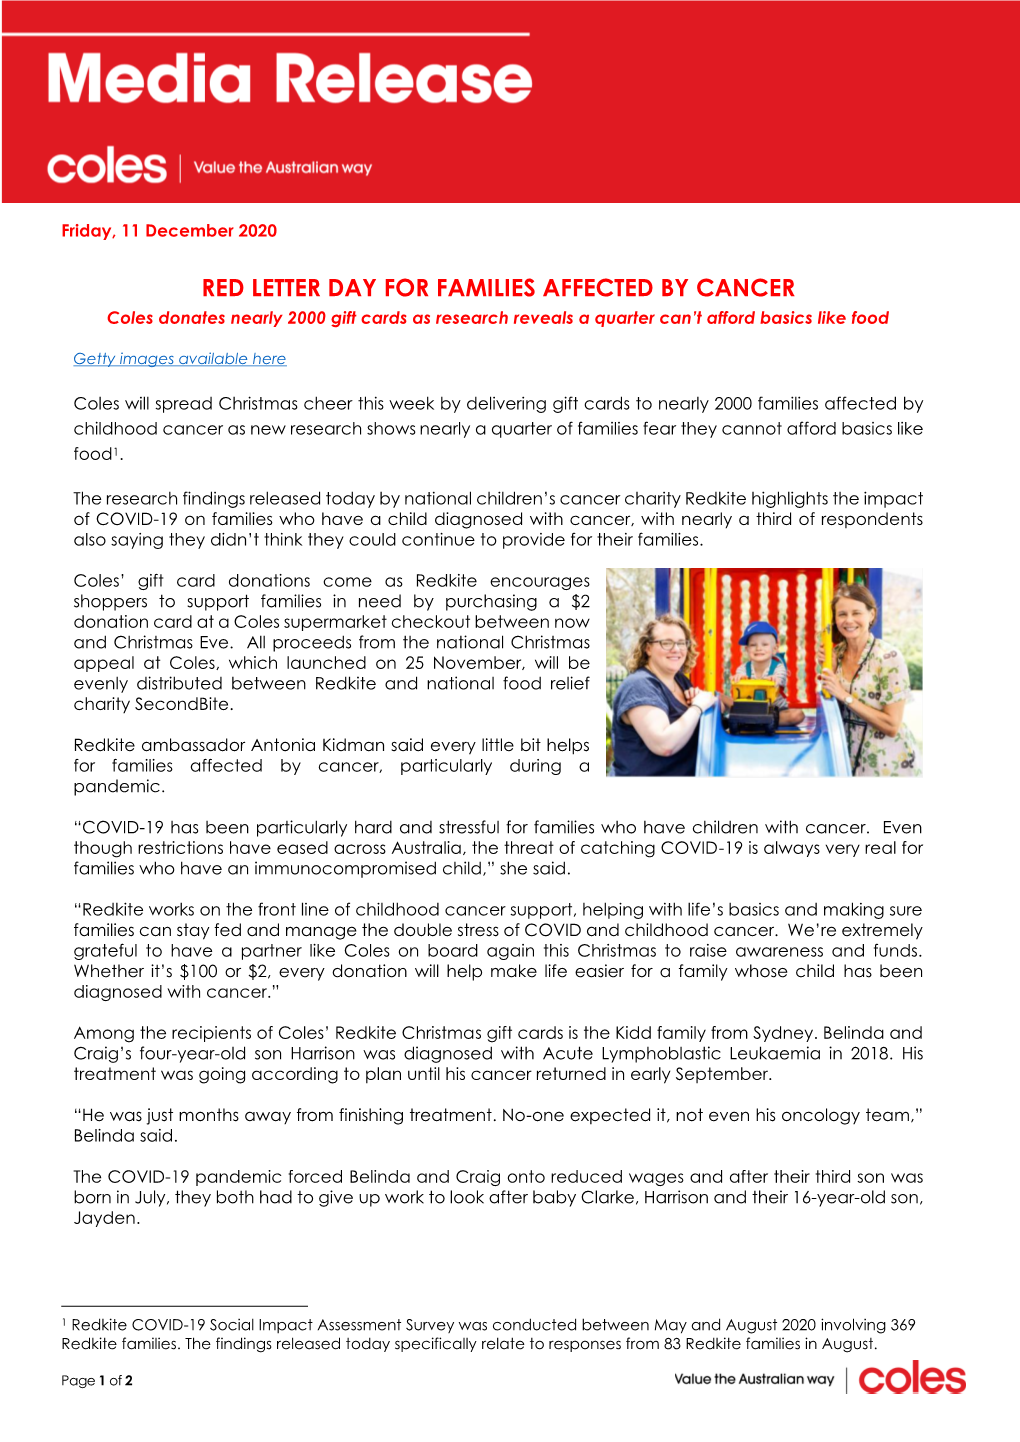 RED LETTER DAY for FAMILIES AFFECTED by CANCER Coles Donates Nearly 2000 Gift Cards As Research Reveals a Quarter Can’T Afford Basics Like Food